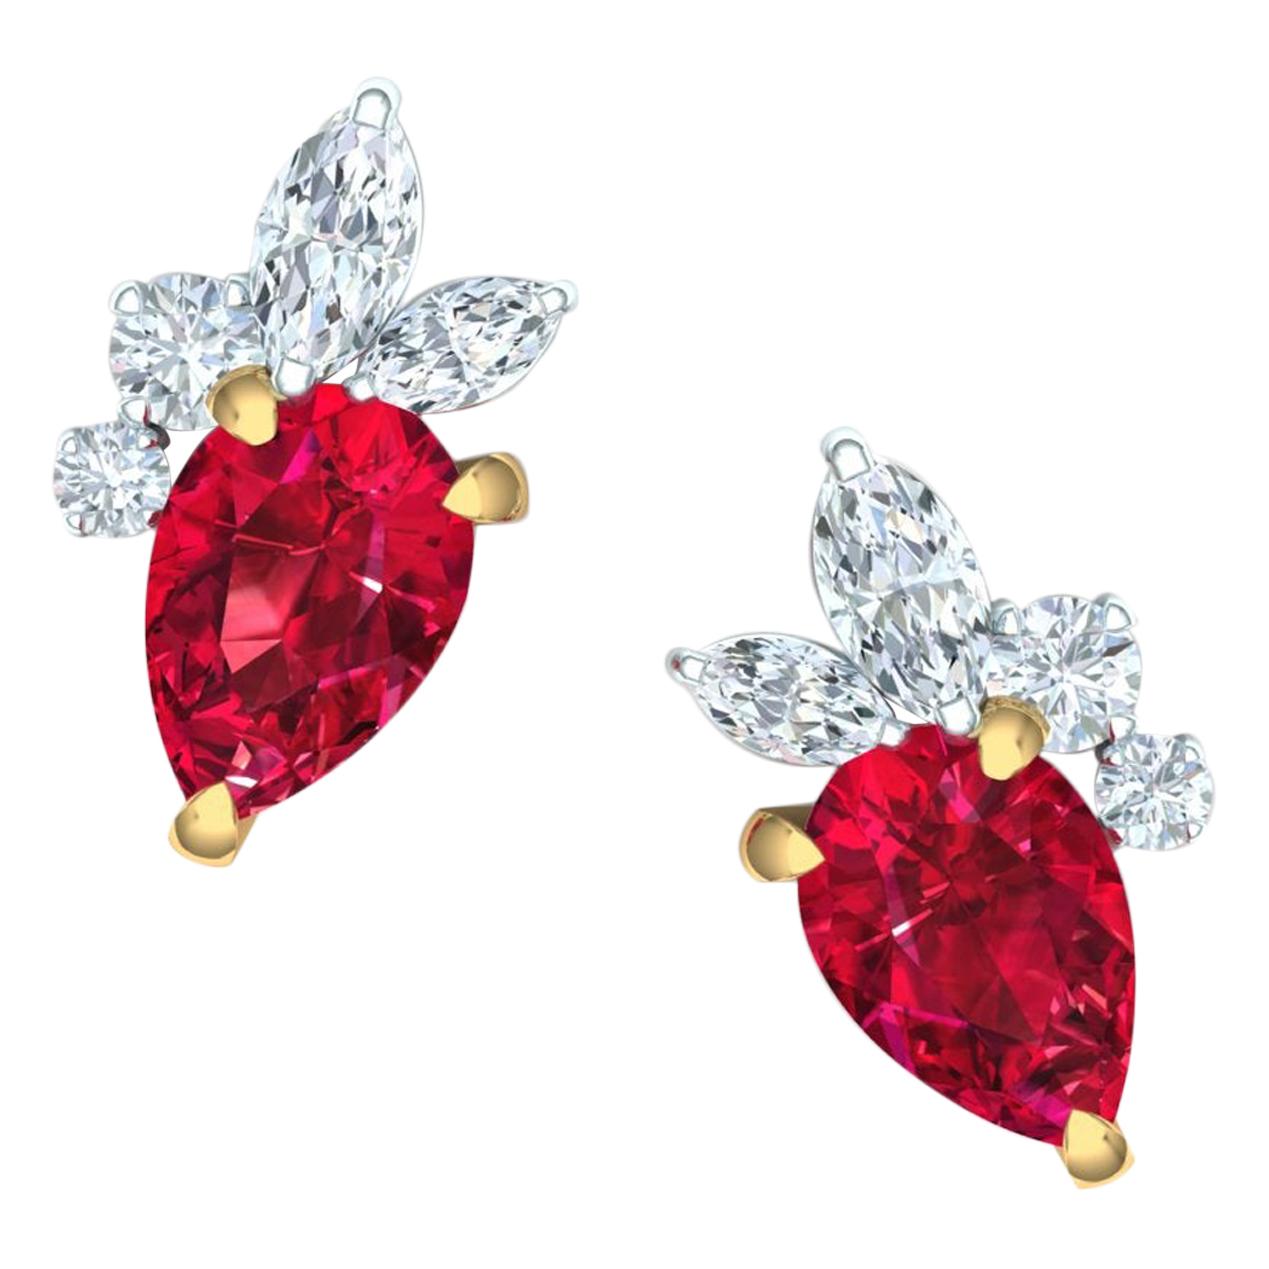 1.5 Carat Ruby and Diamond Cluster Earrings Set in Yellow and White Gold